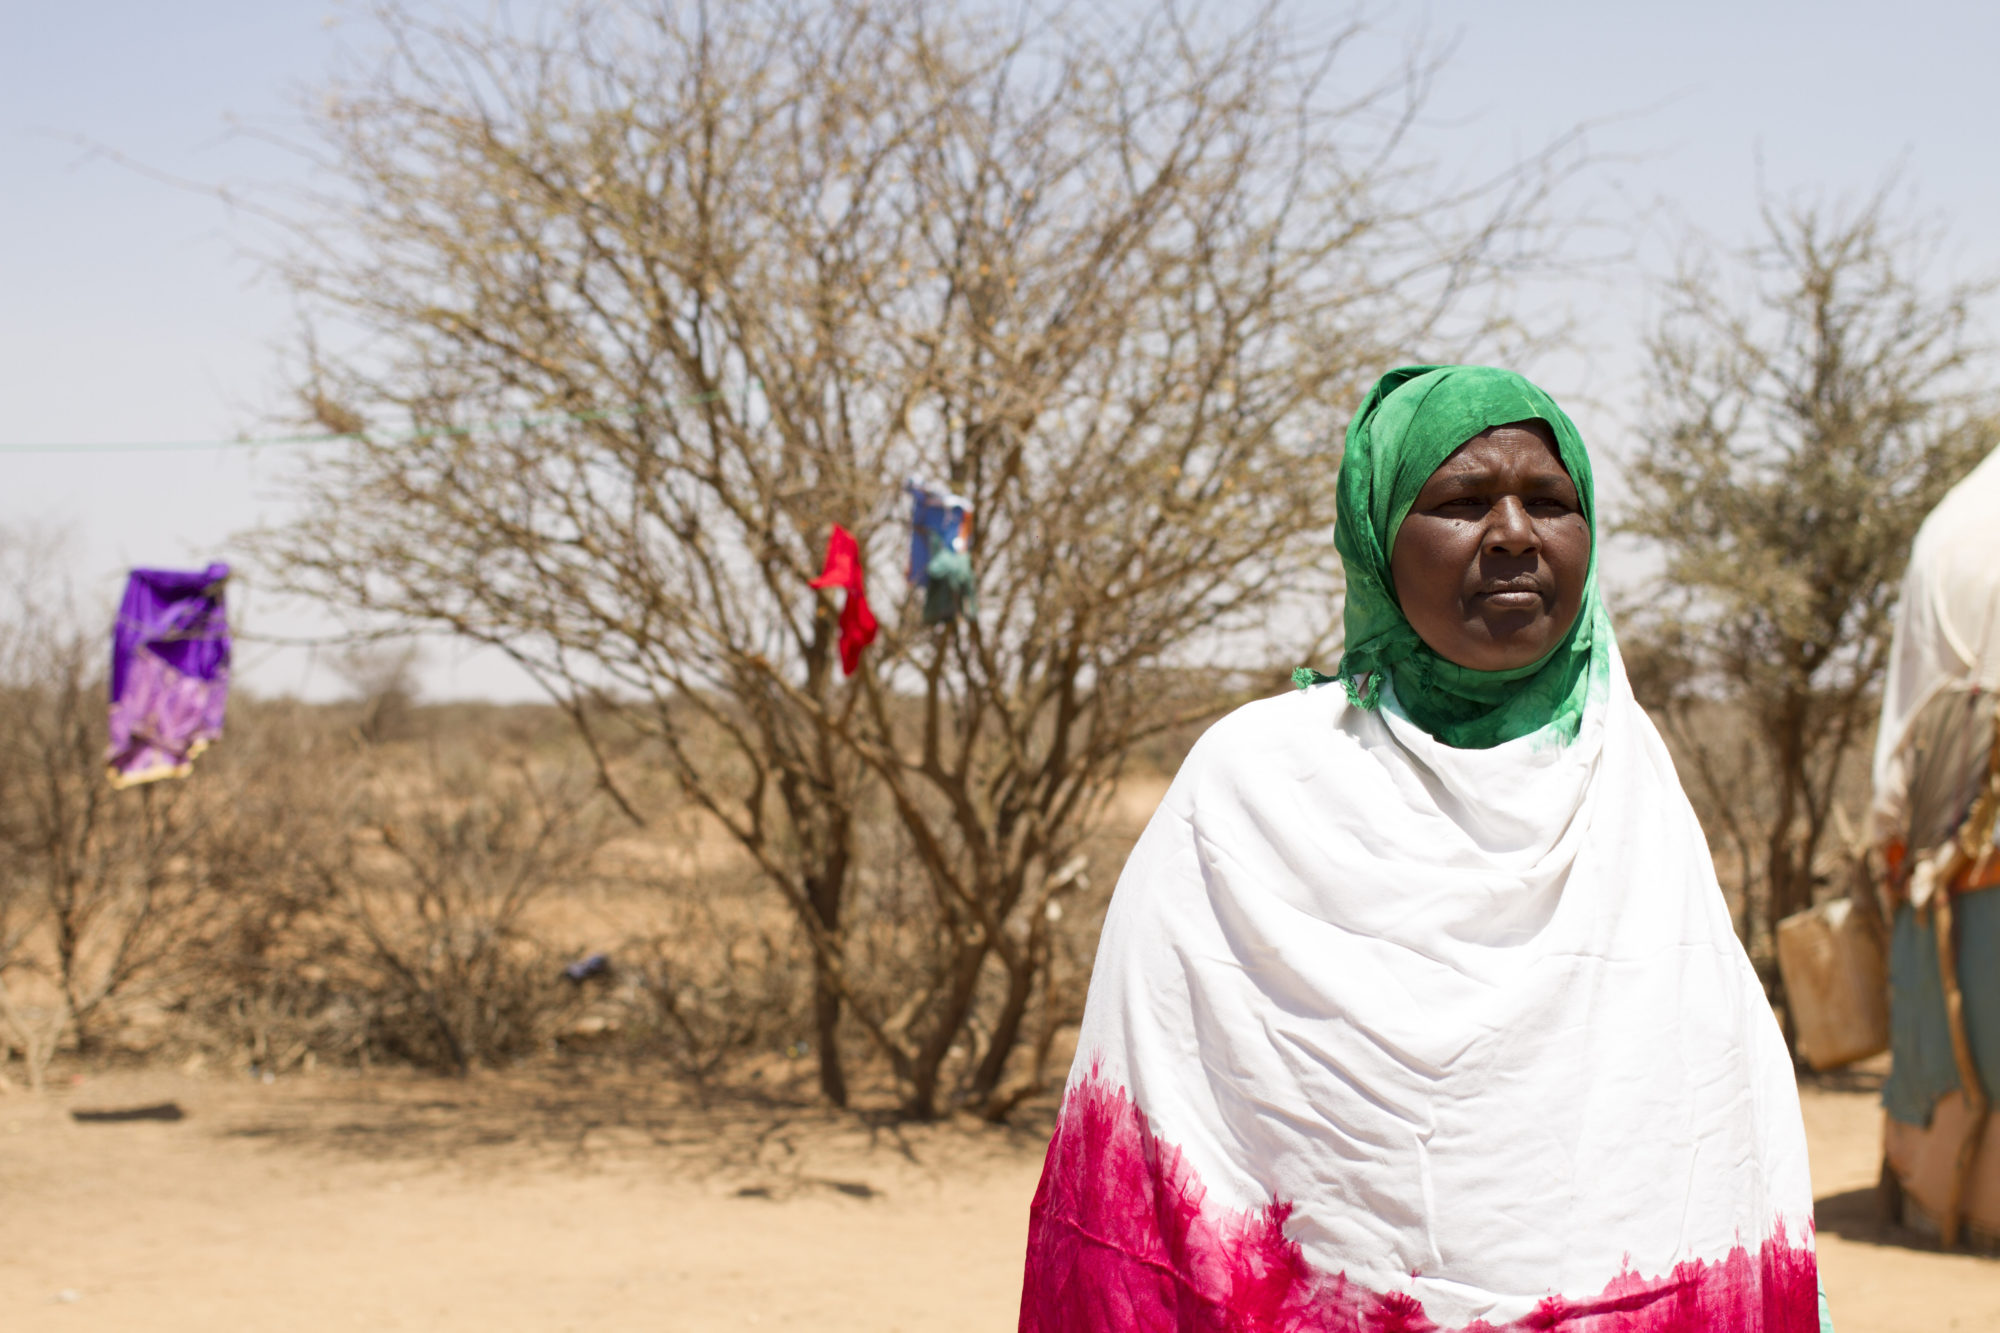 Khadra, 50, is the mother of seven children and the Head of a Women's Coalition in a settlement outside Sayla Bari, Hargeisa, Somaliland. Photo credit: Ashley Hamer /ActionAid.